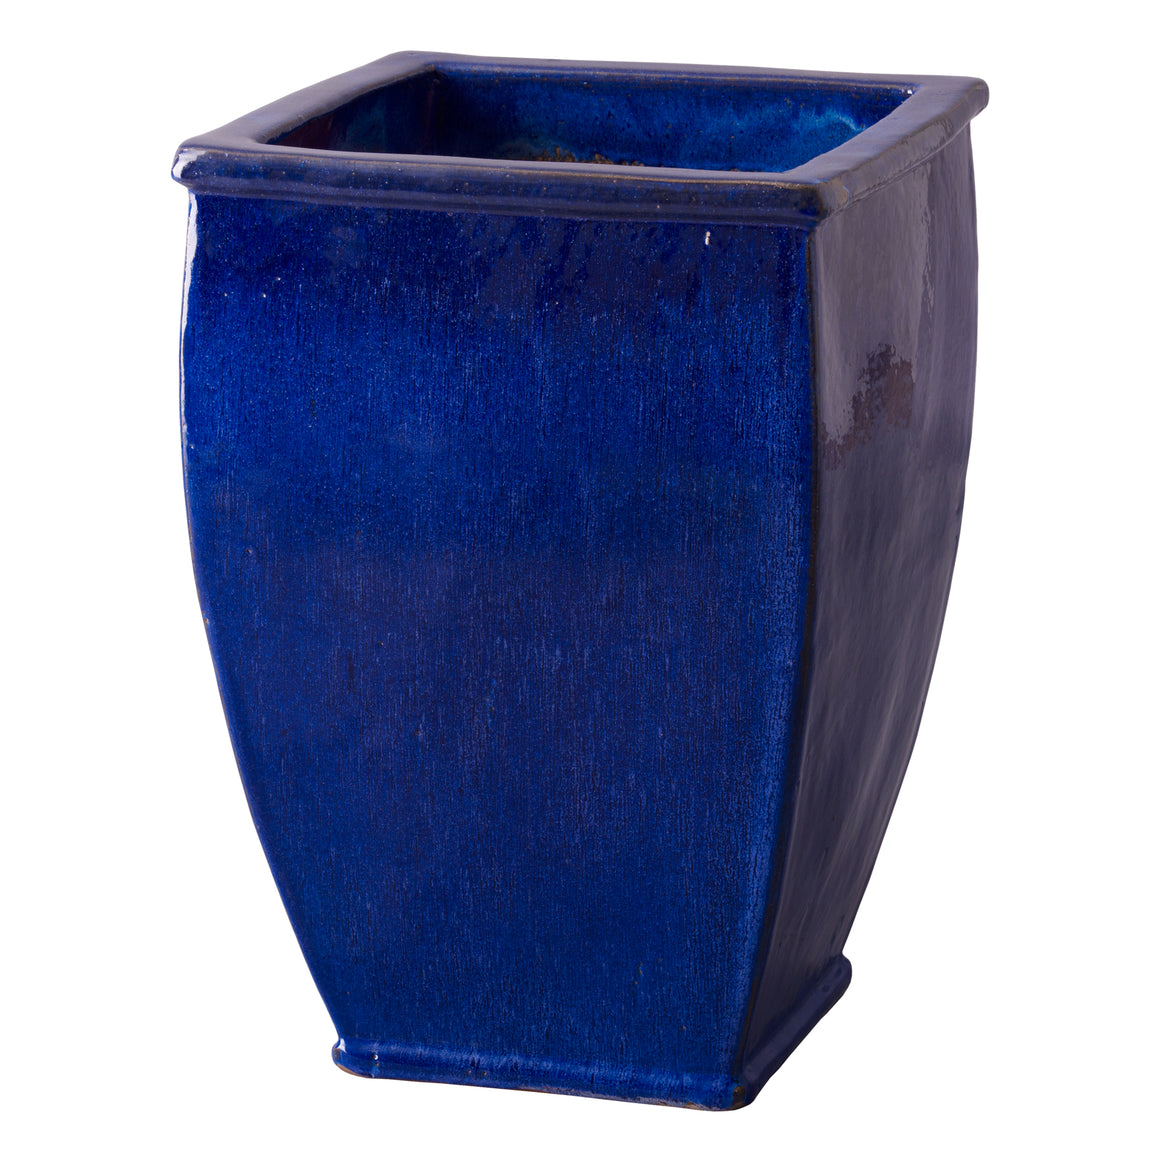 Large Square Planter with a Blue Glaze